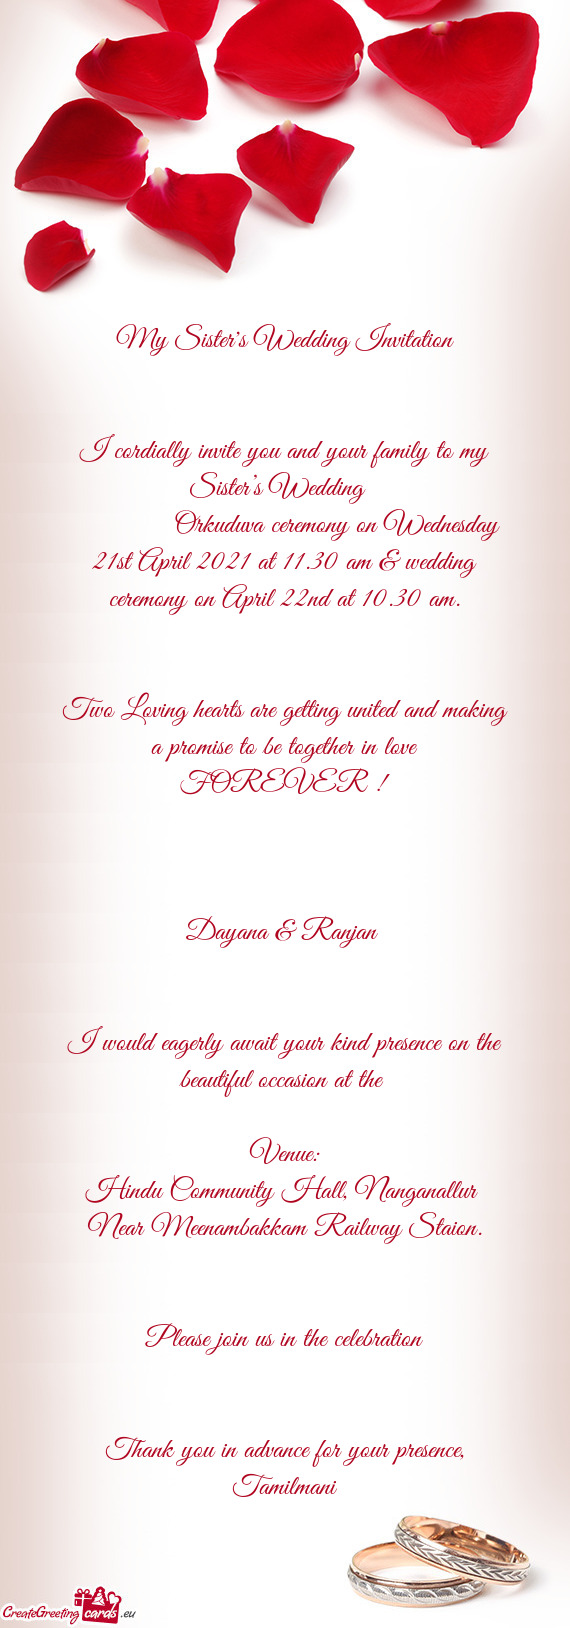 Orkuduva ceremony on Wednesday 21st April 2021 at 11.30 am & wedding ceremony on April